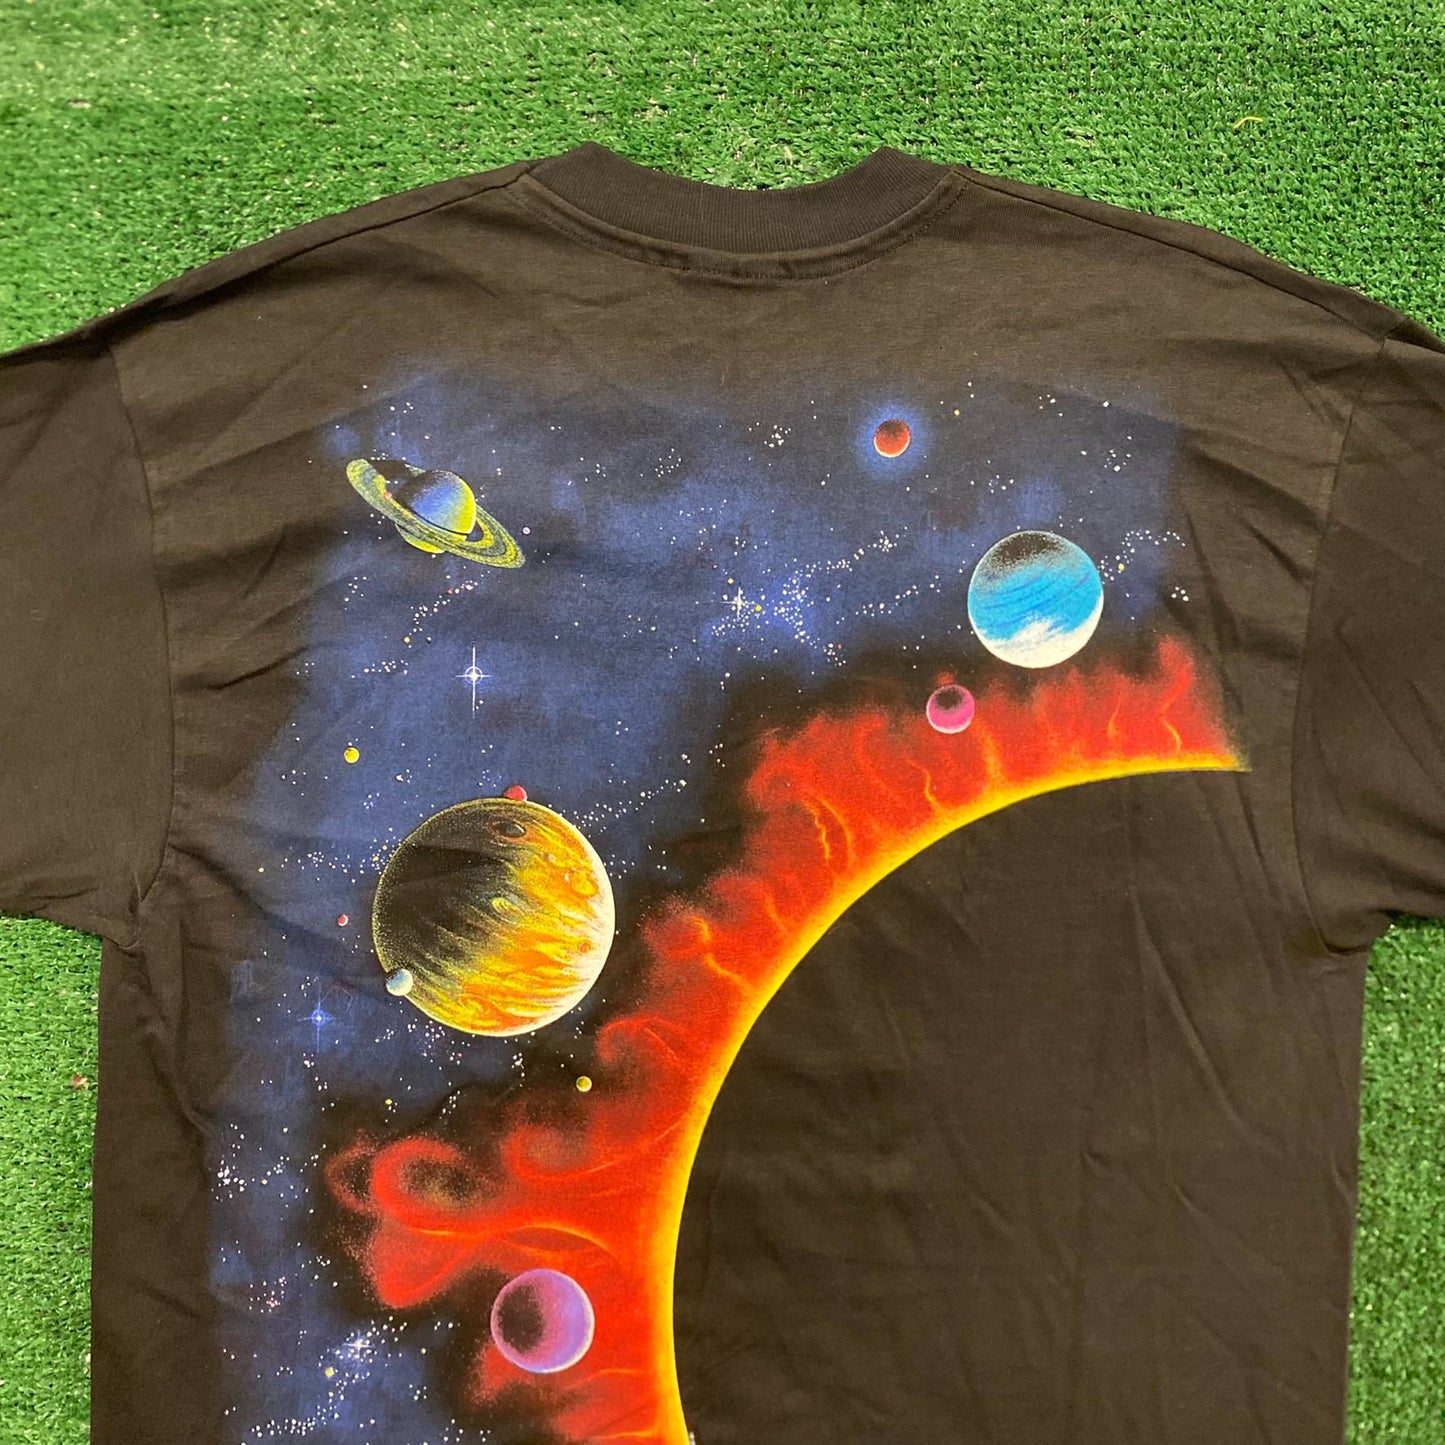 Solar System Planets Vintage 90s Astronomy Space T-Shirt